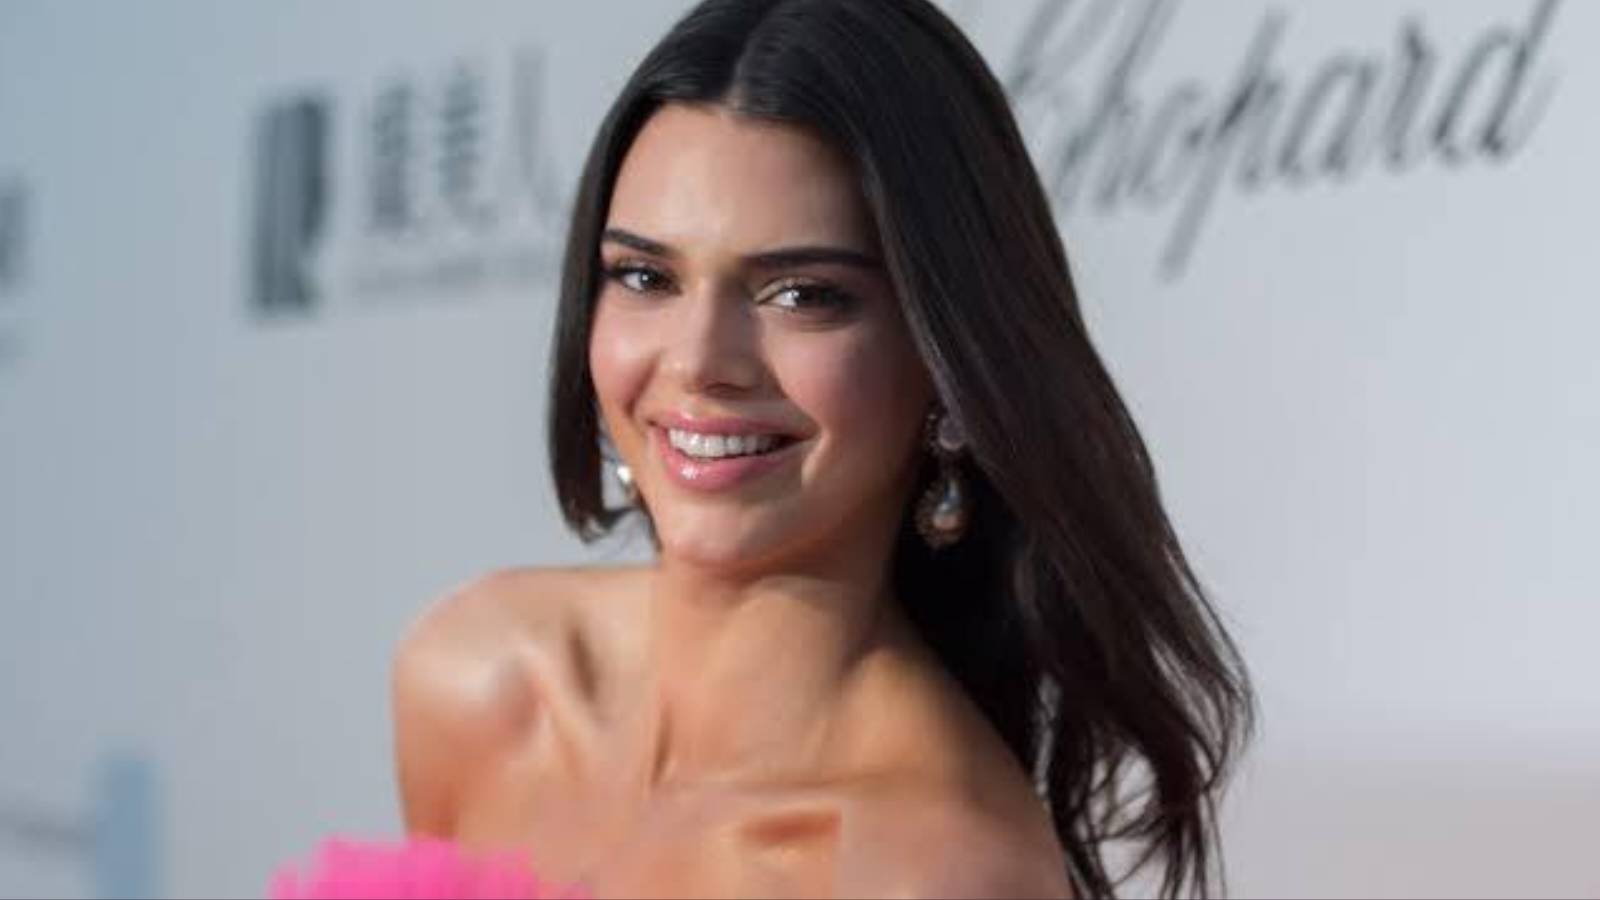 Here's how you can contact Kendall Jenner